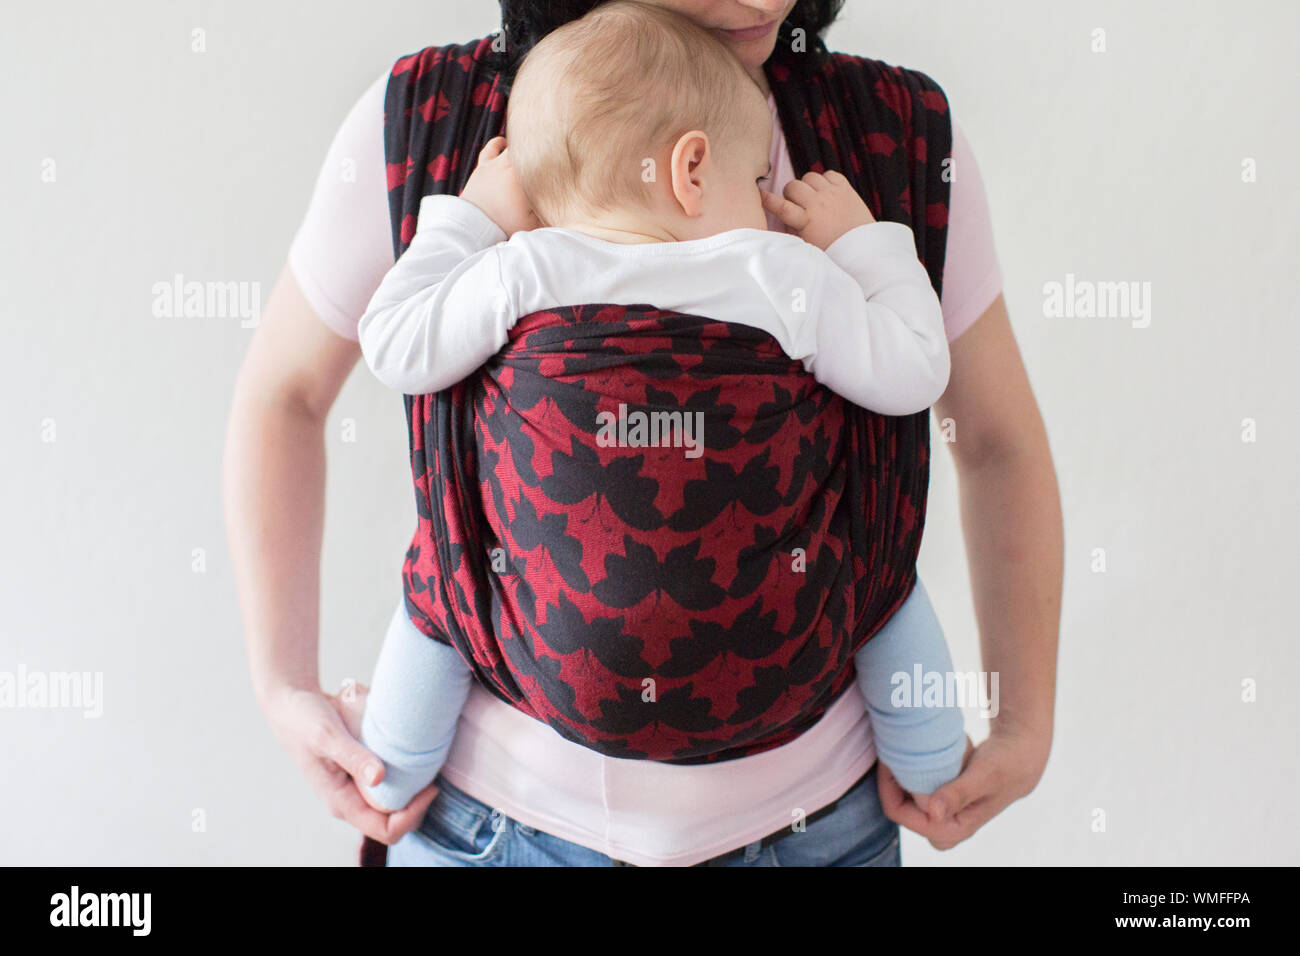 Midsection Of Woman Carrying Baby In Harness Stock Photo